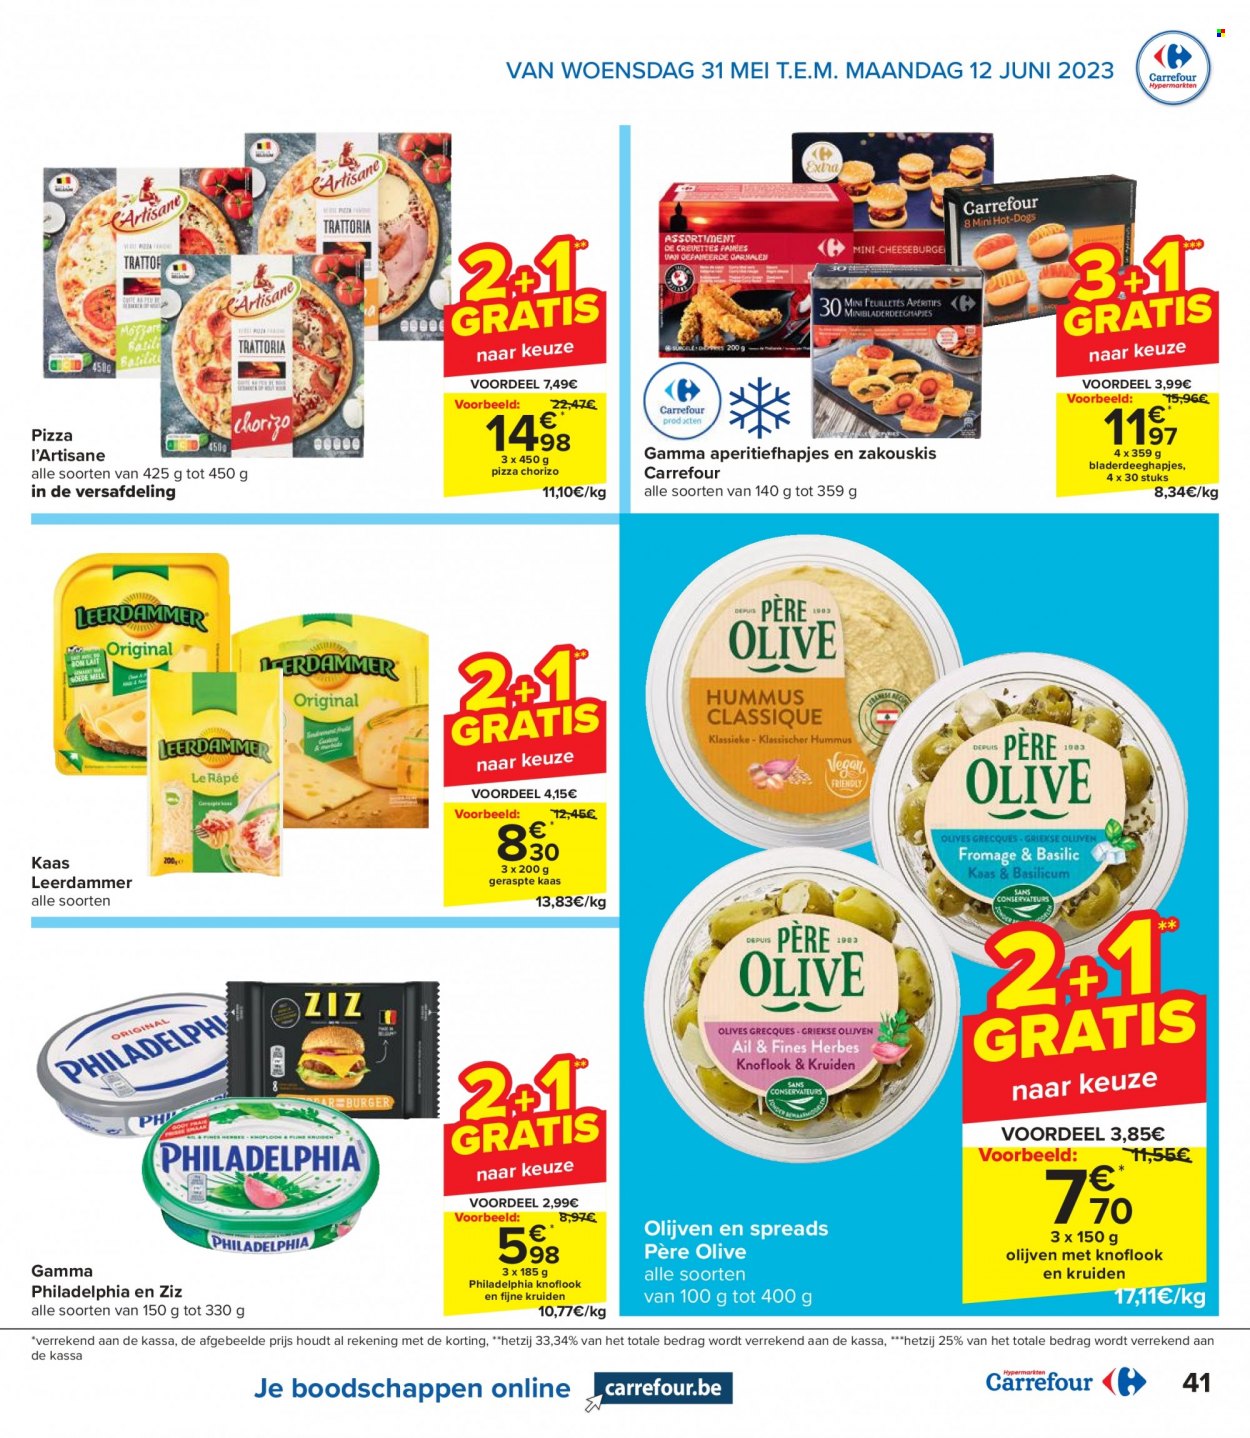 Catalogue Carrefour hypermarkt - 31.5.2023 - 12.6.2023. Page 41.